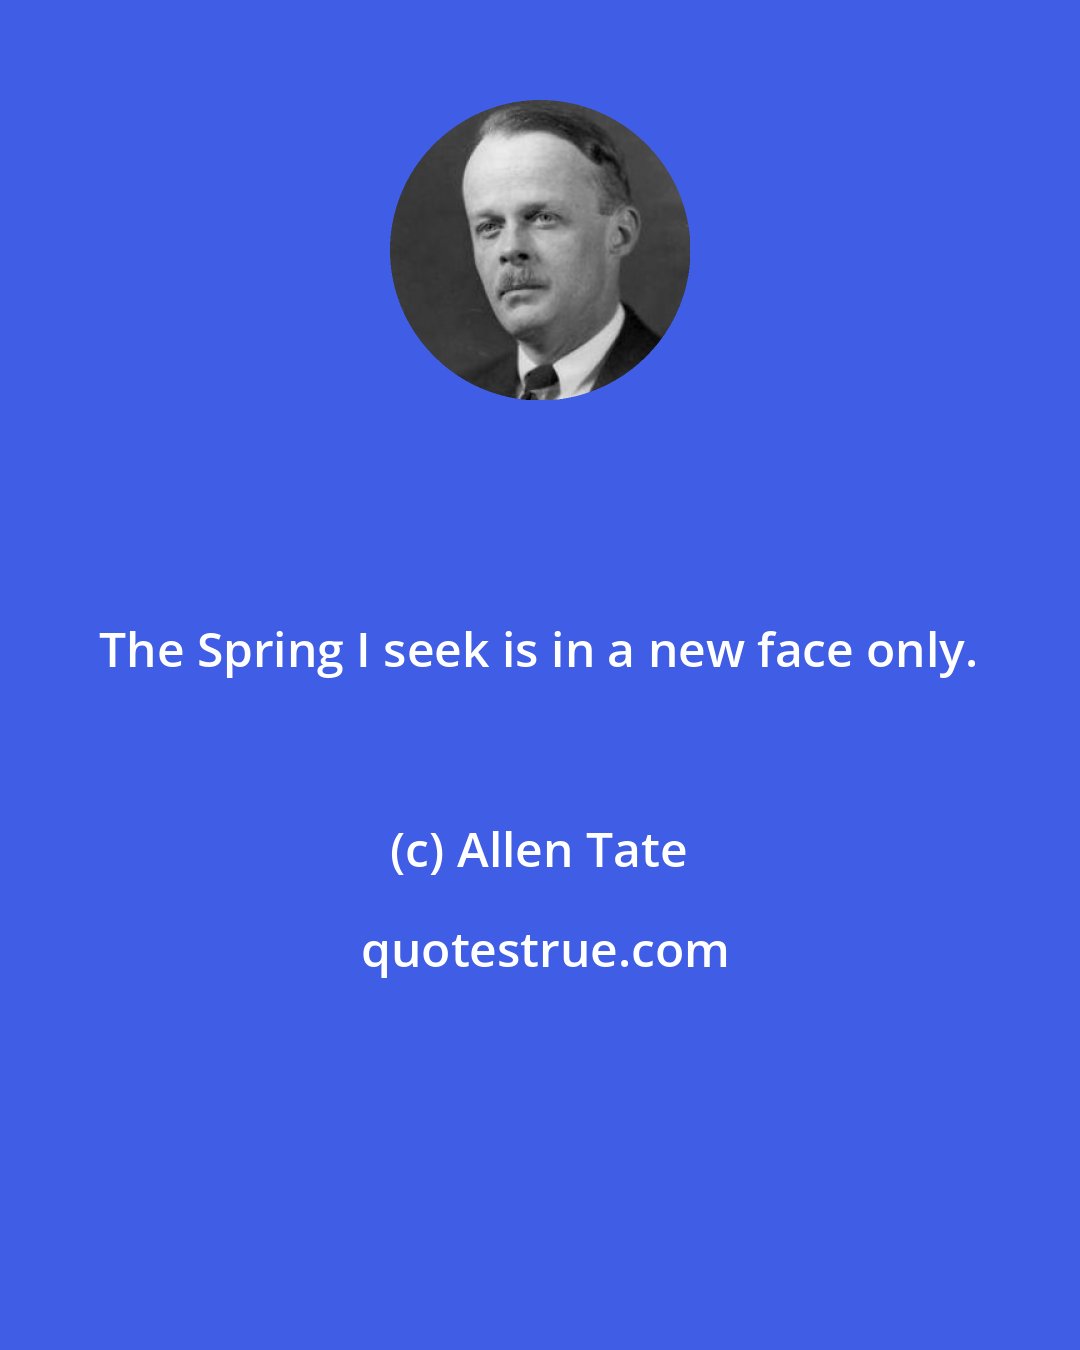 Allen Tate: The Spring I seek is in a new face only.